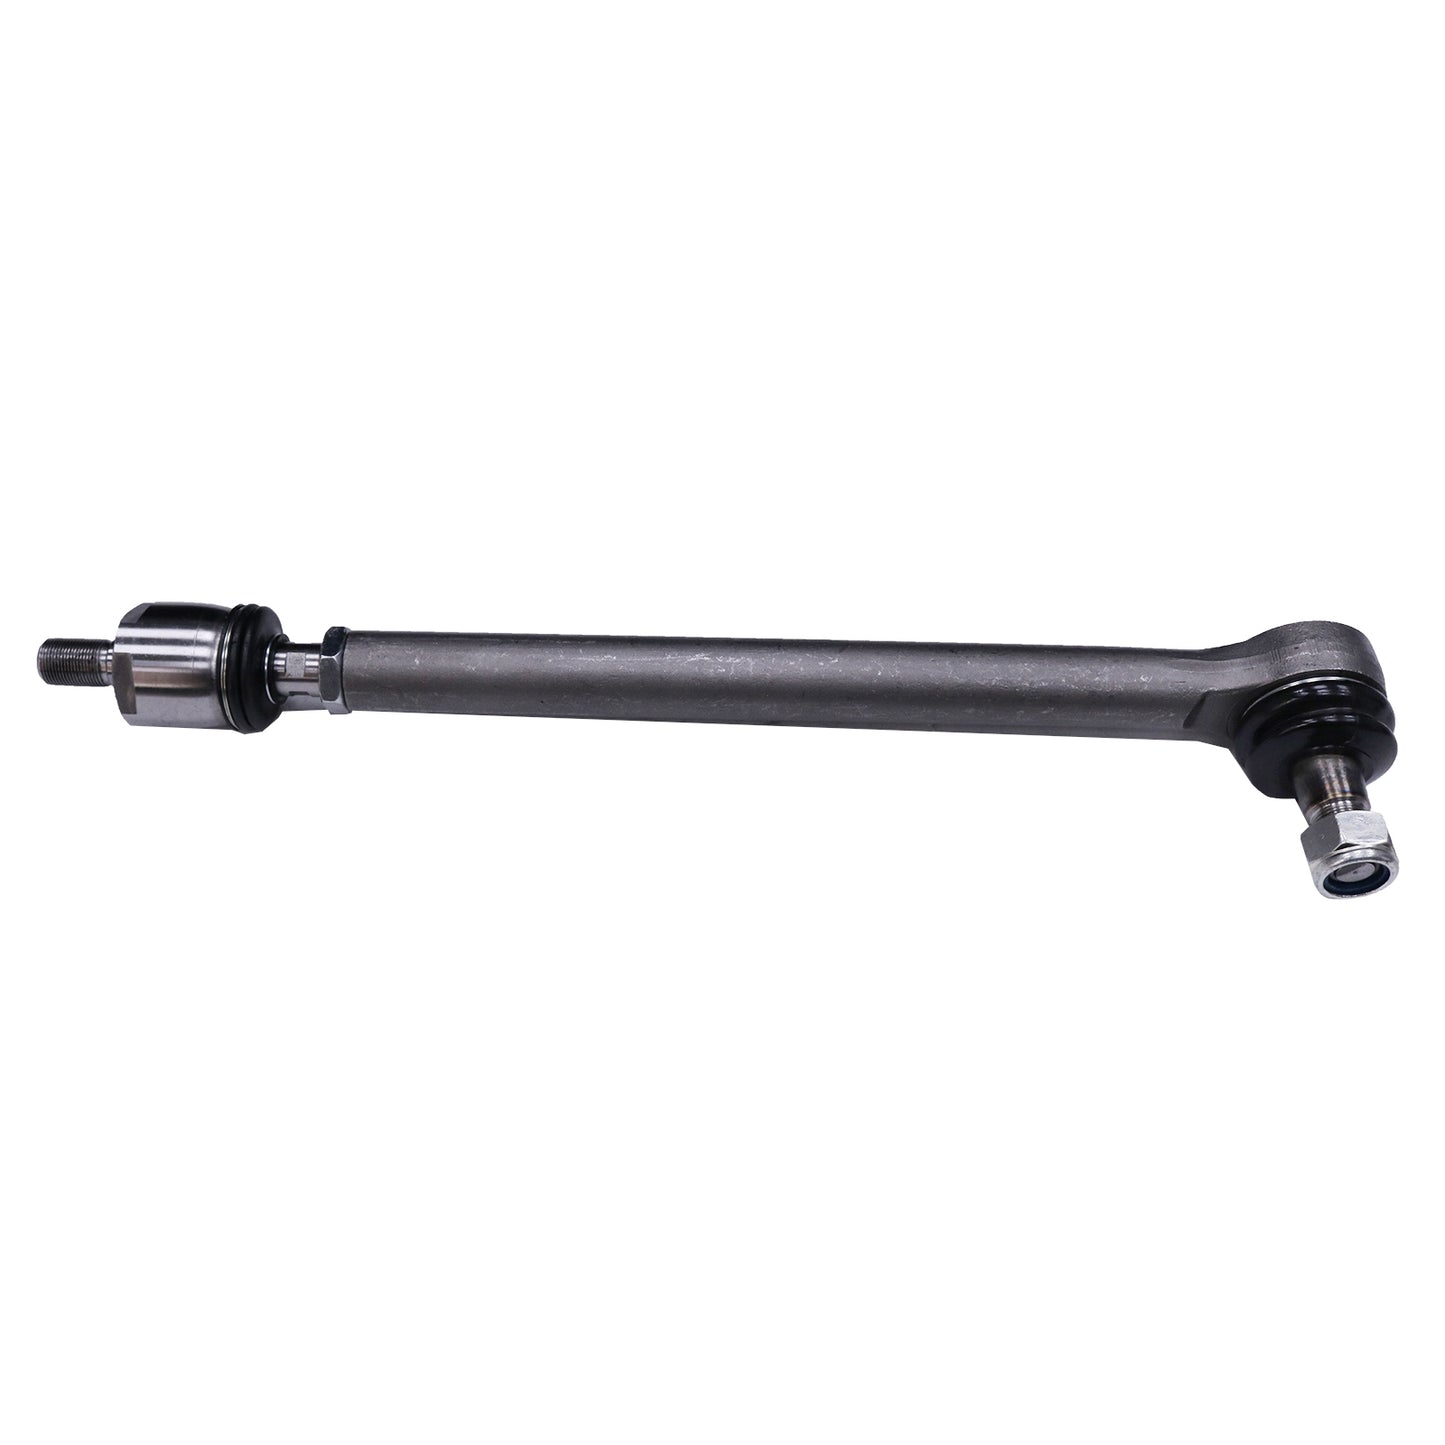 New 366665A1 Tie Rod Compatible with Case 686G 686GXR 688G Light Equipment